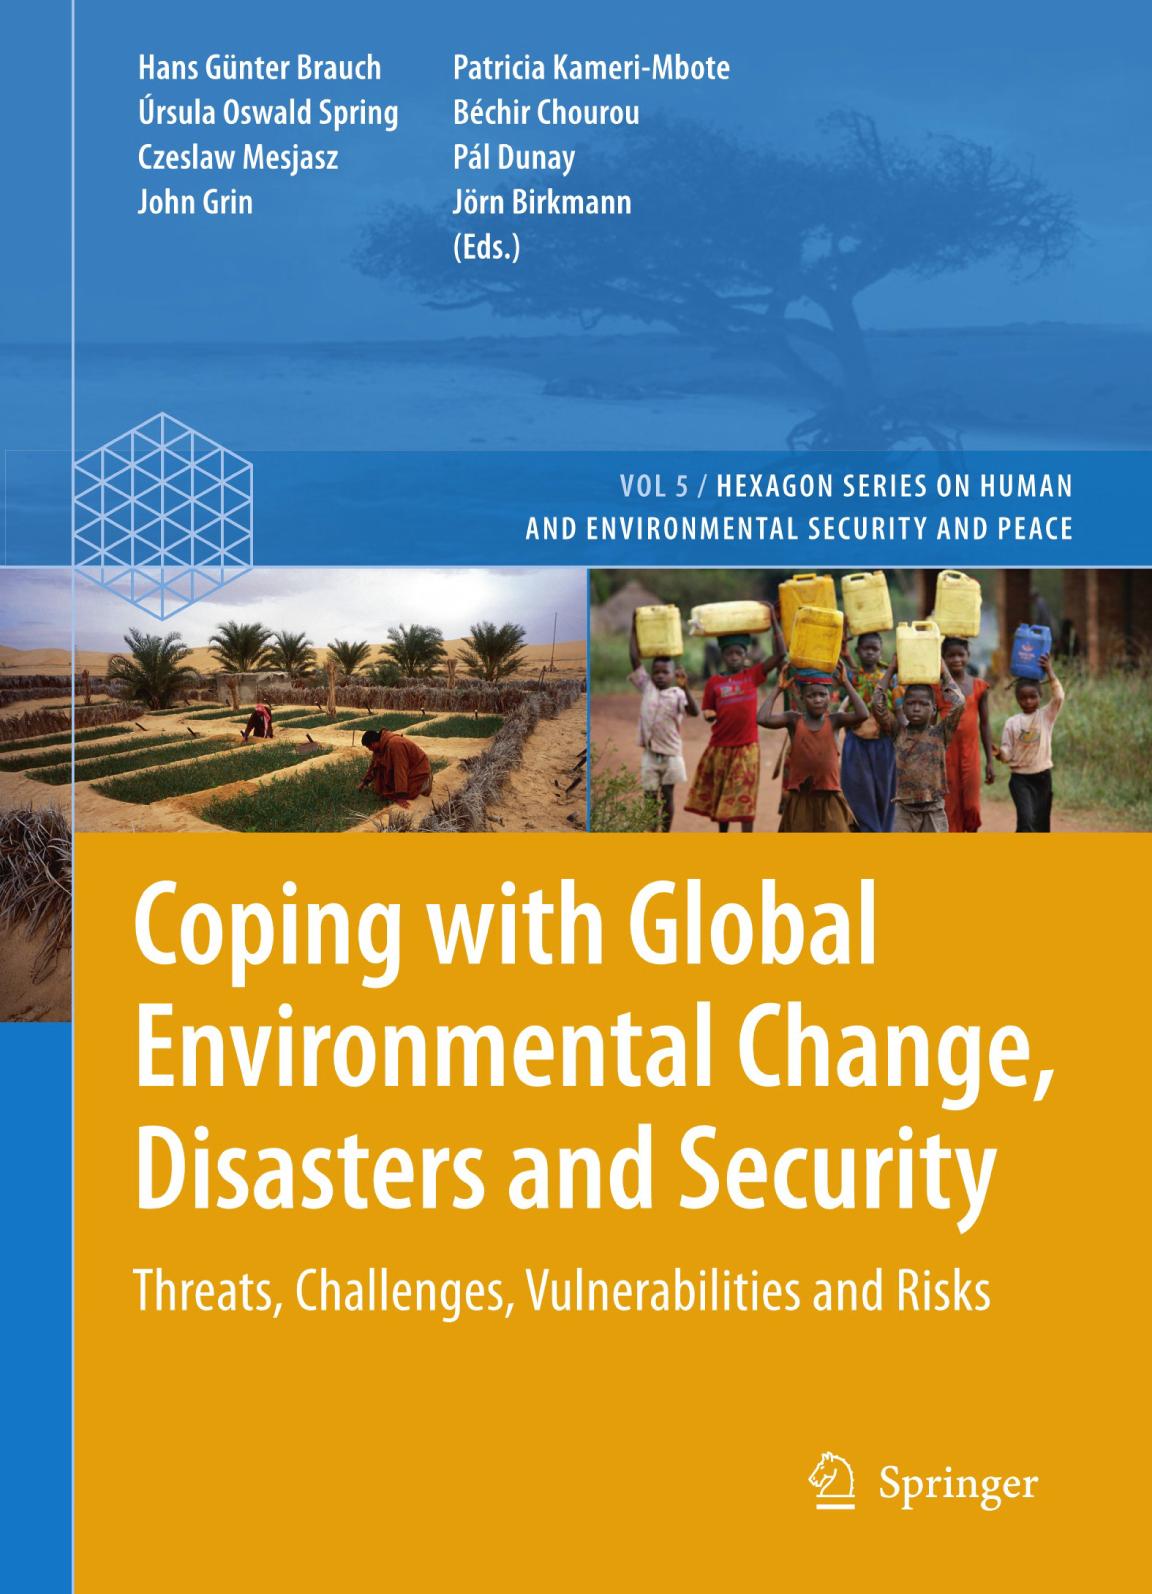 Coping with Global Environmental Change